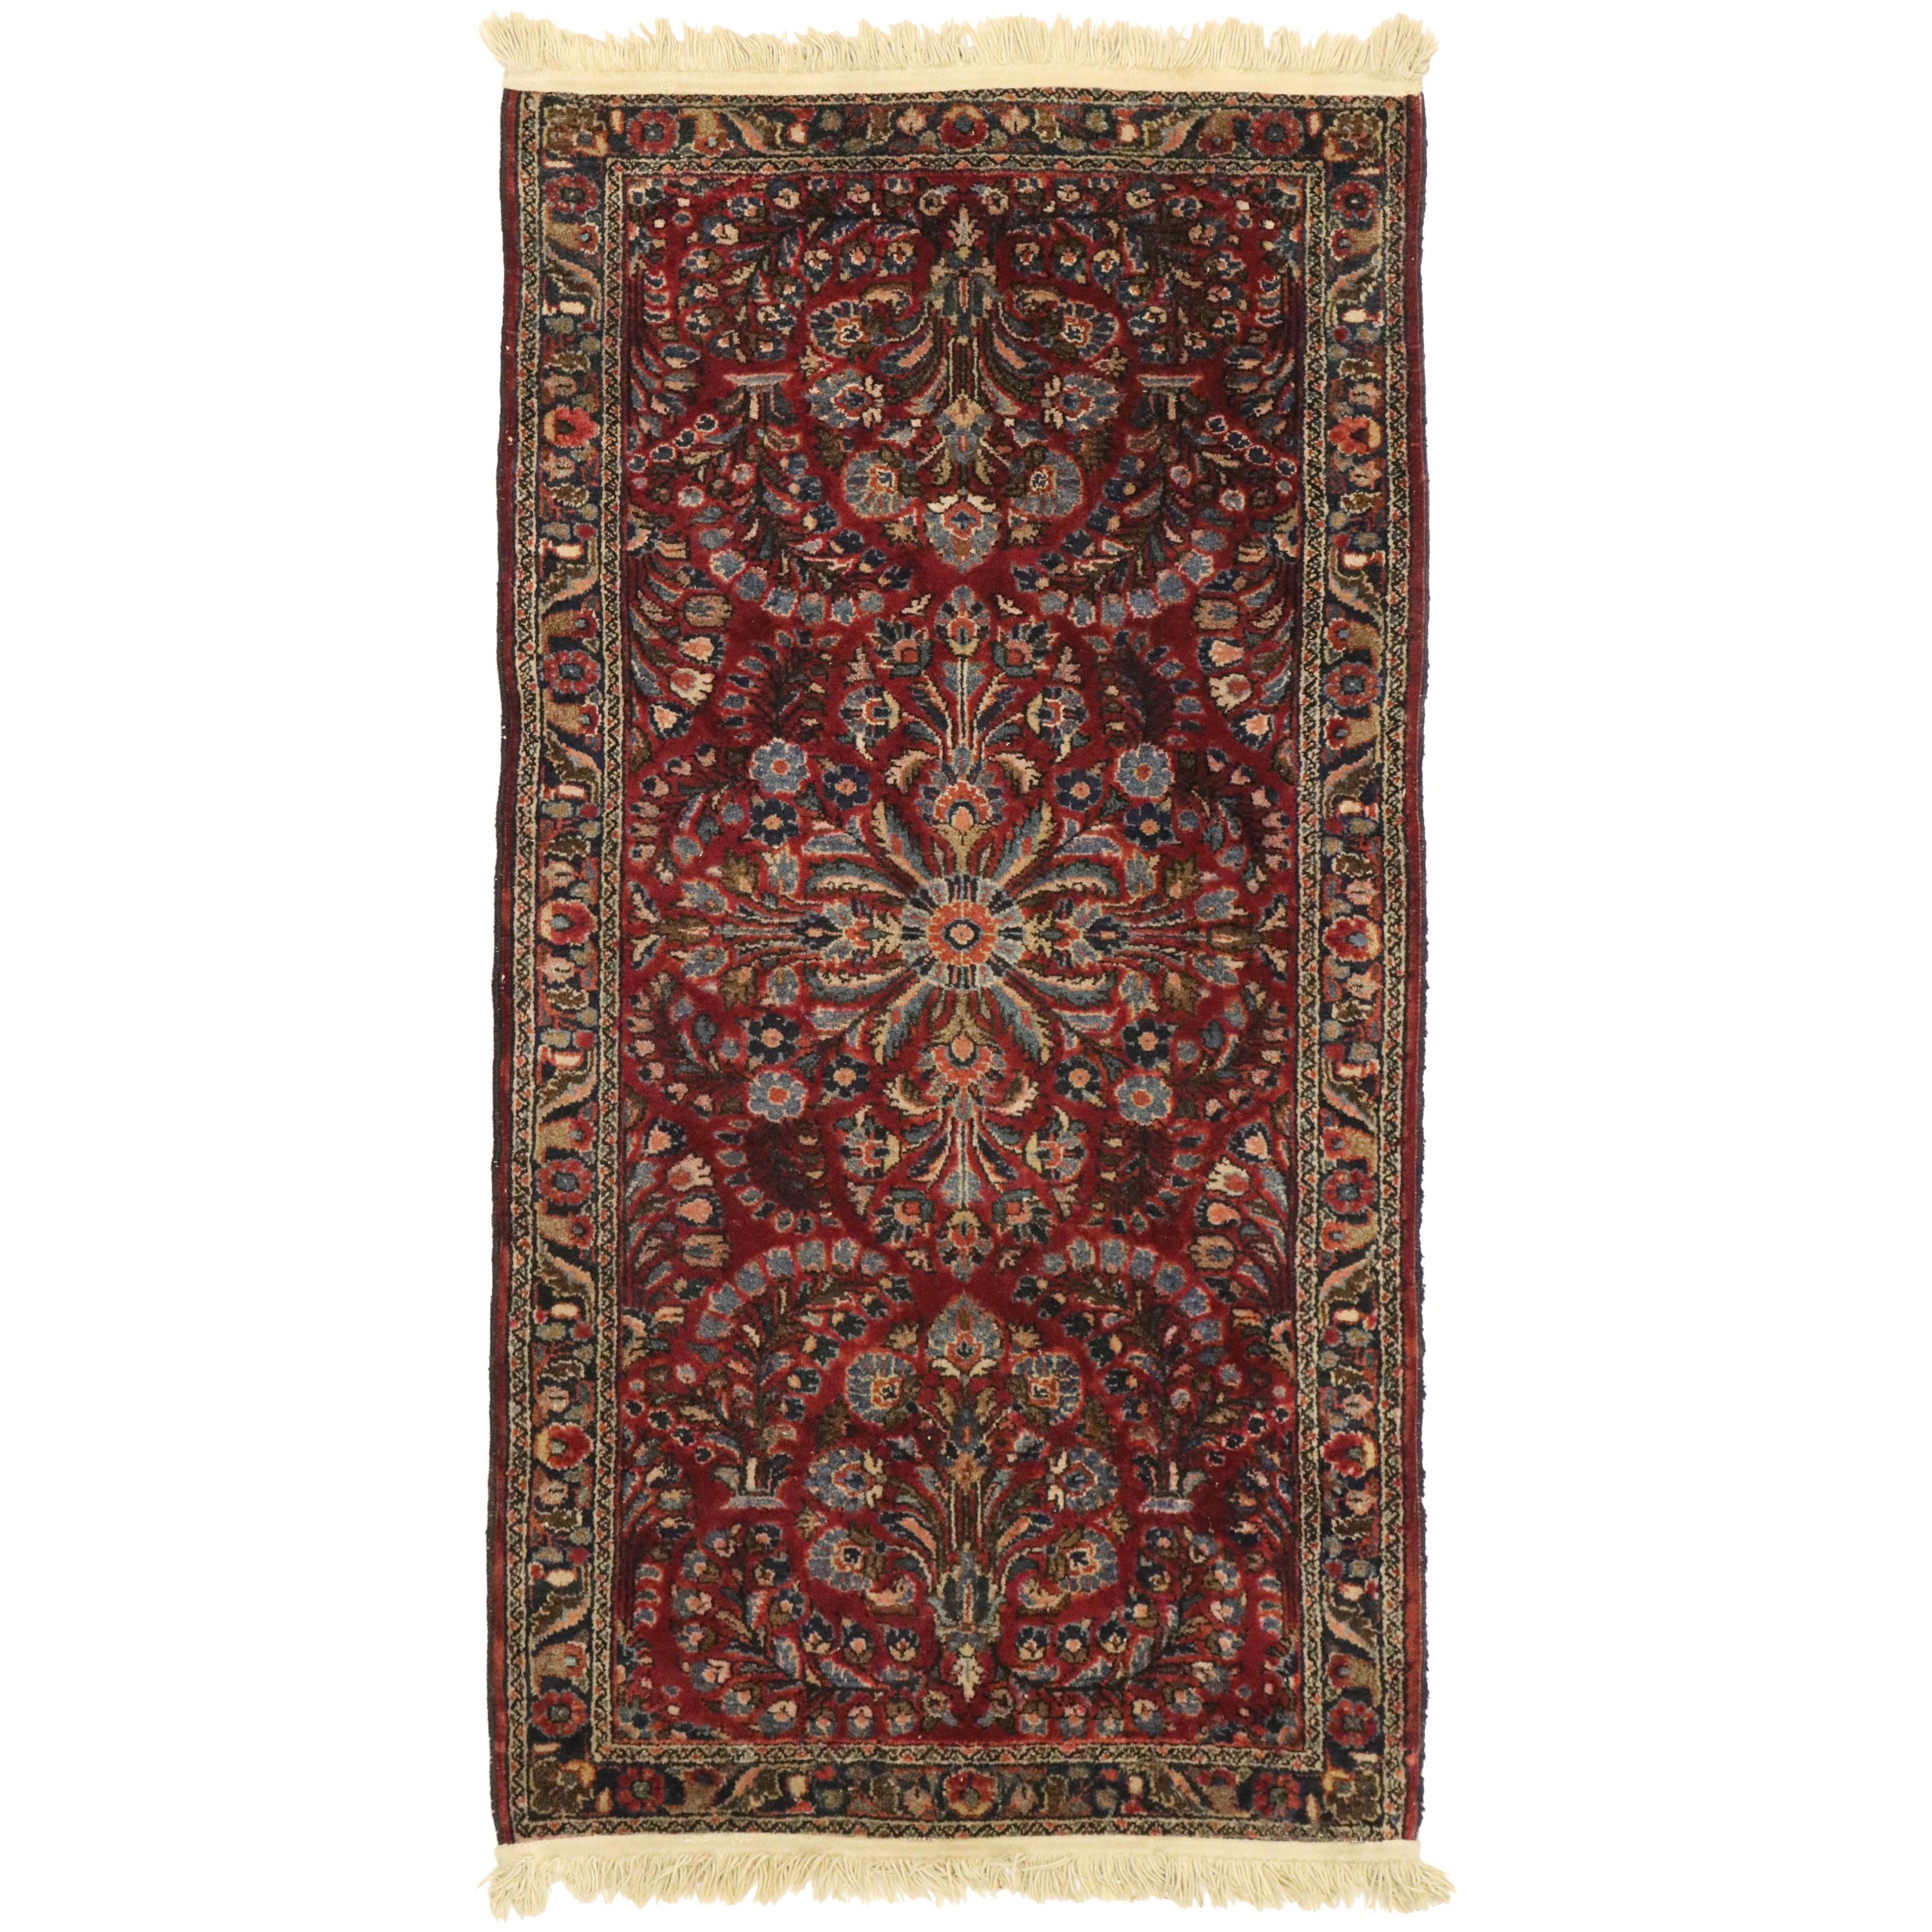 Antique Persian Sarouk Rug with Traditional Style